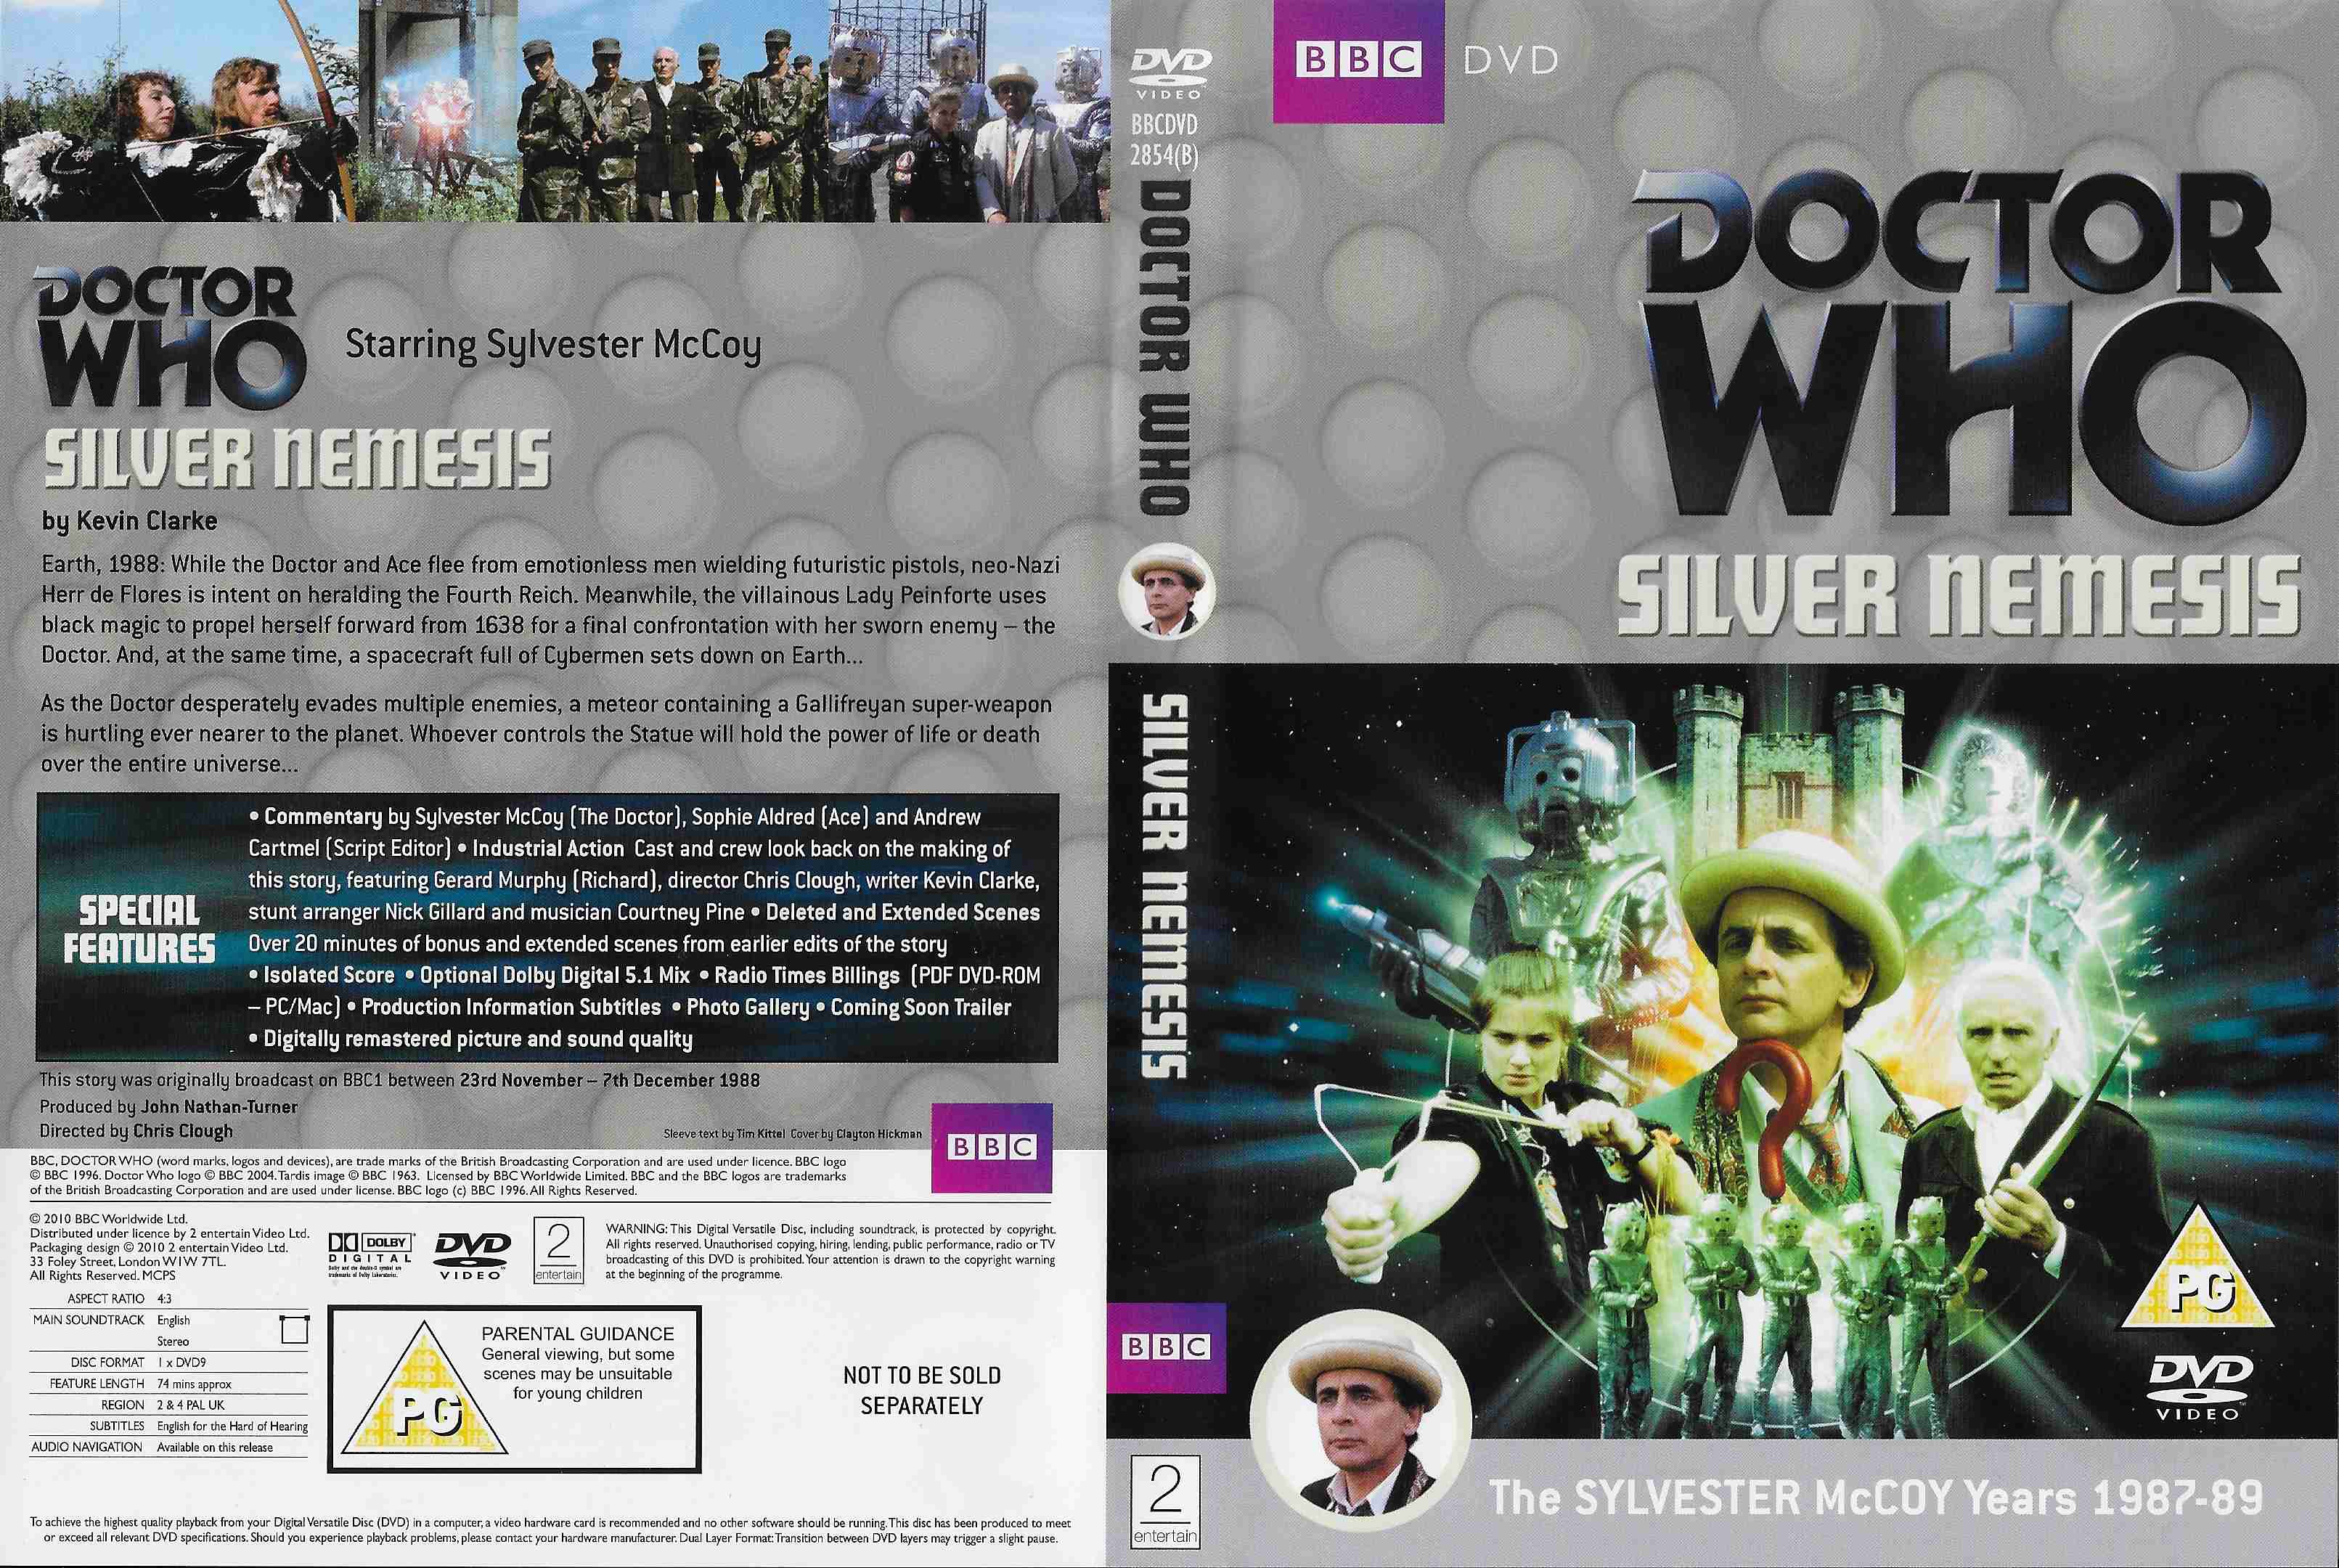 Picture of BBCDVD 2854B Doctor Who - Silver nemesis by artist Kevin Clarke from the BBC records and Tapes library